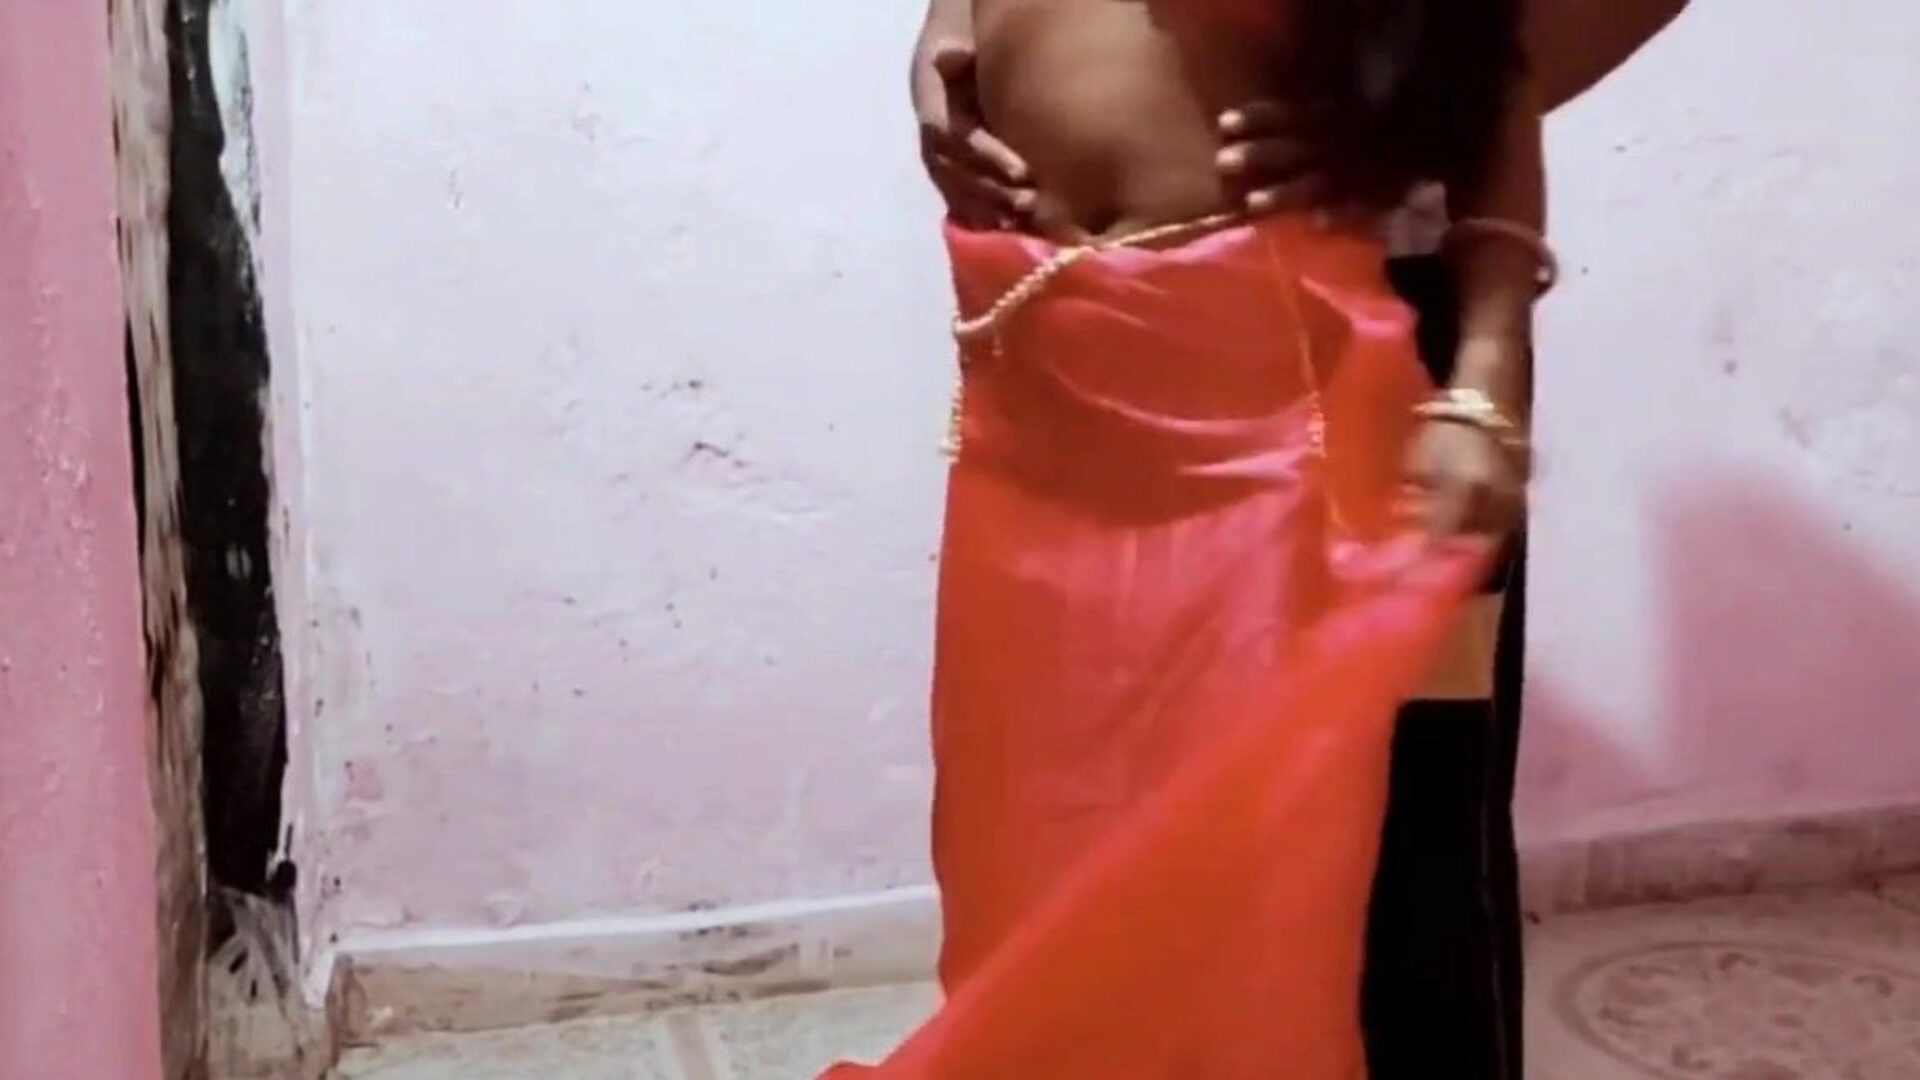 alex ne bhabhi ko choda room fun with hubby: free porn b9 watch alex ne bhabhi ko choda room fun with hubby movie scene on xhamster - the ultimate archive of free-for-all sri lankan asian hd xxx pornography tube movies movies